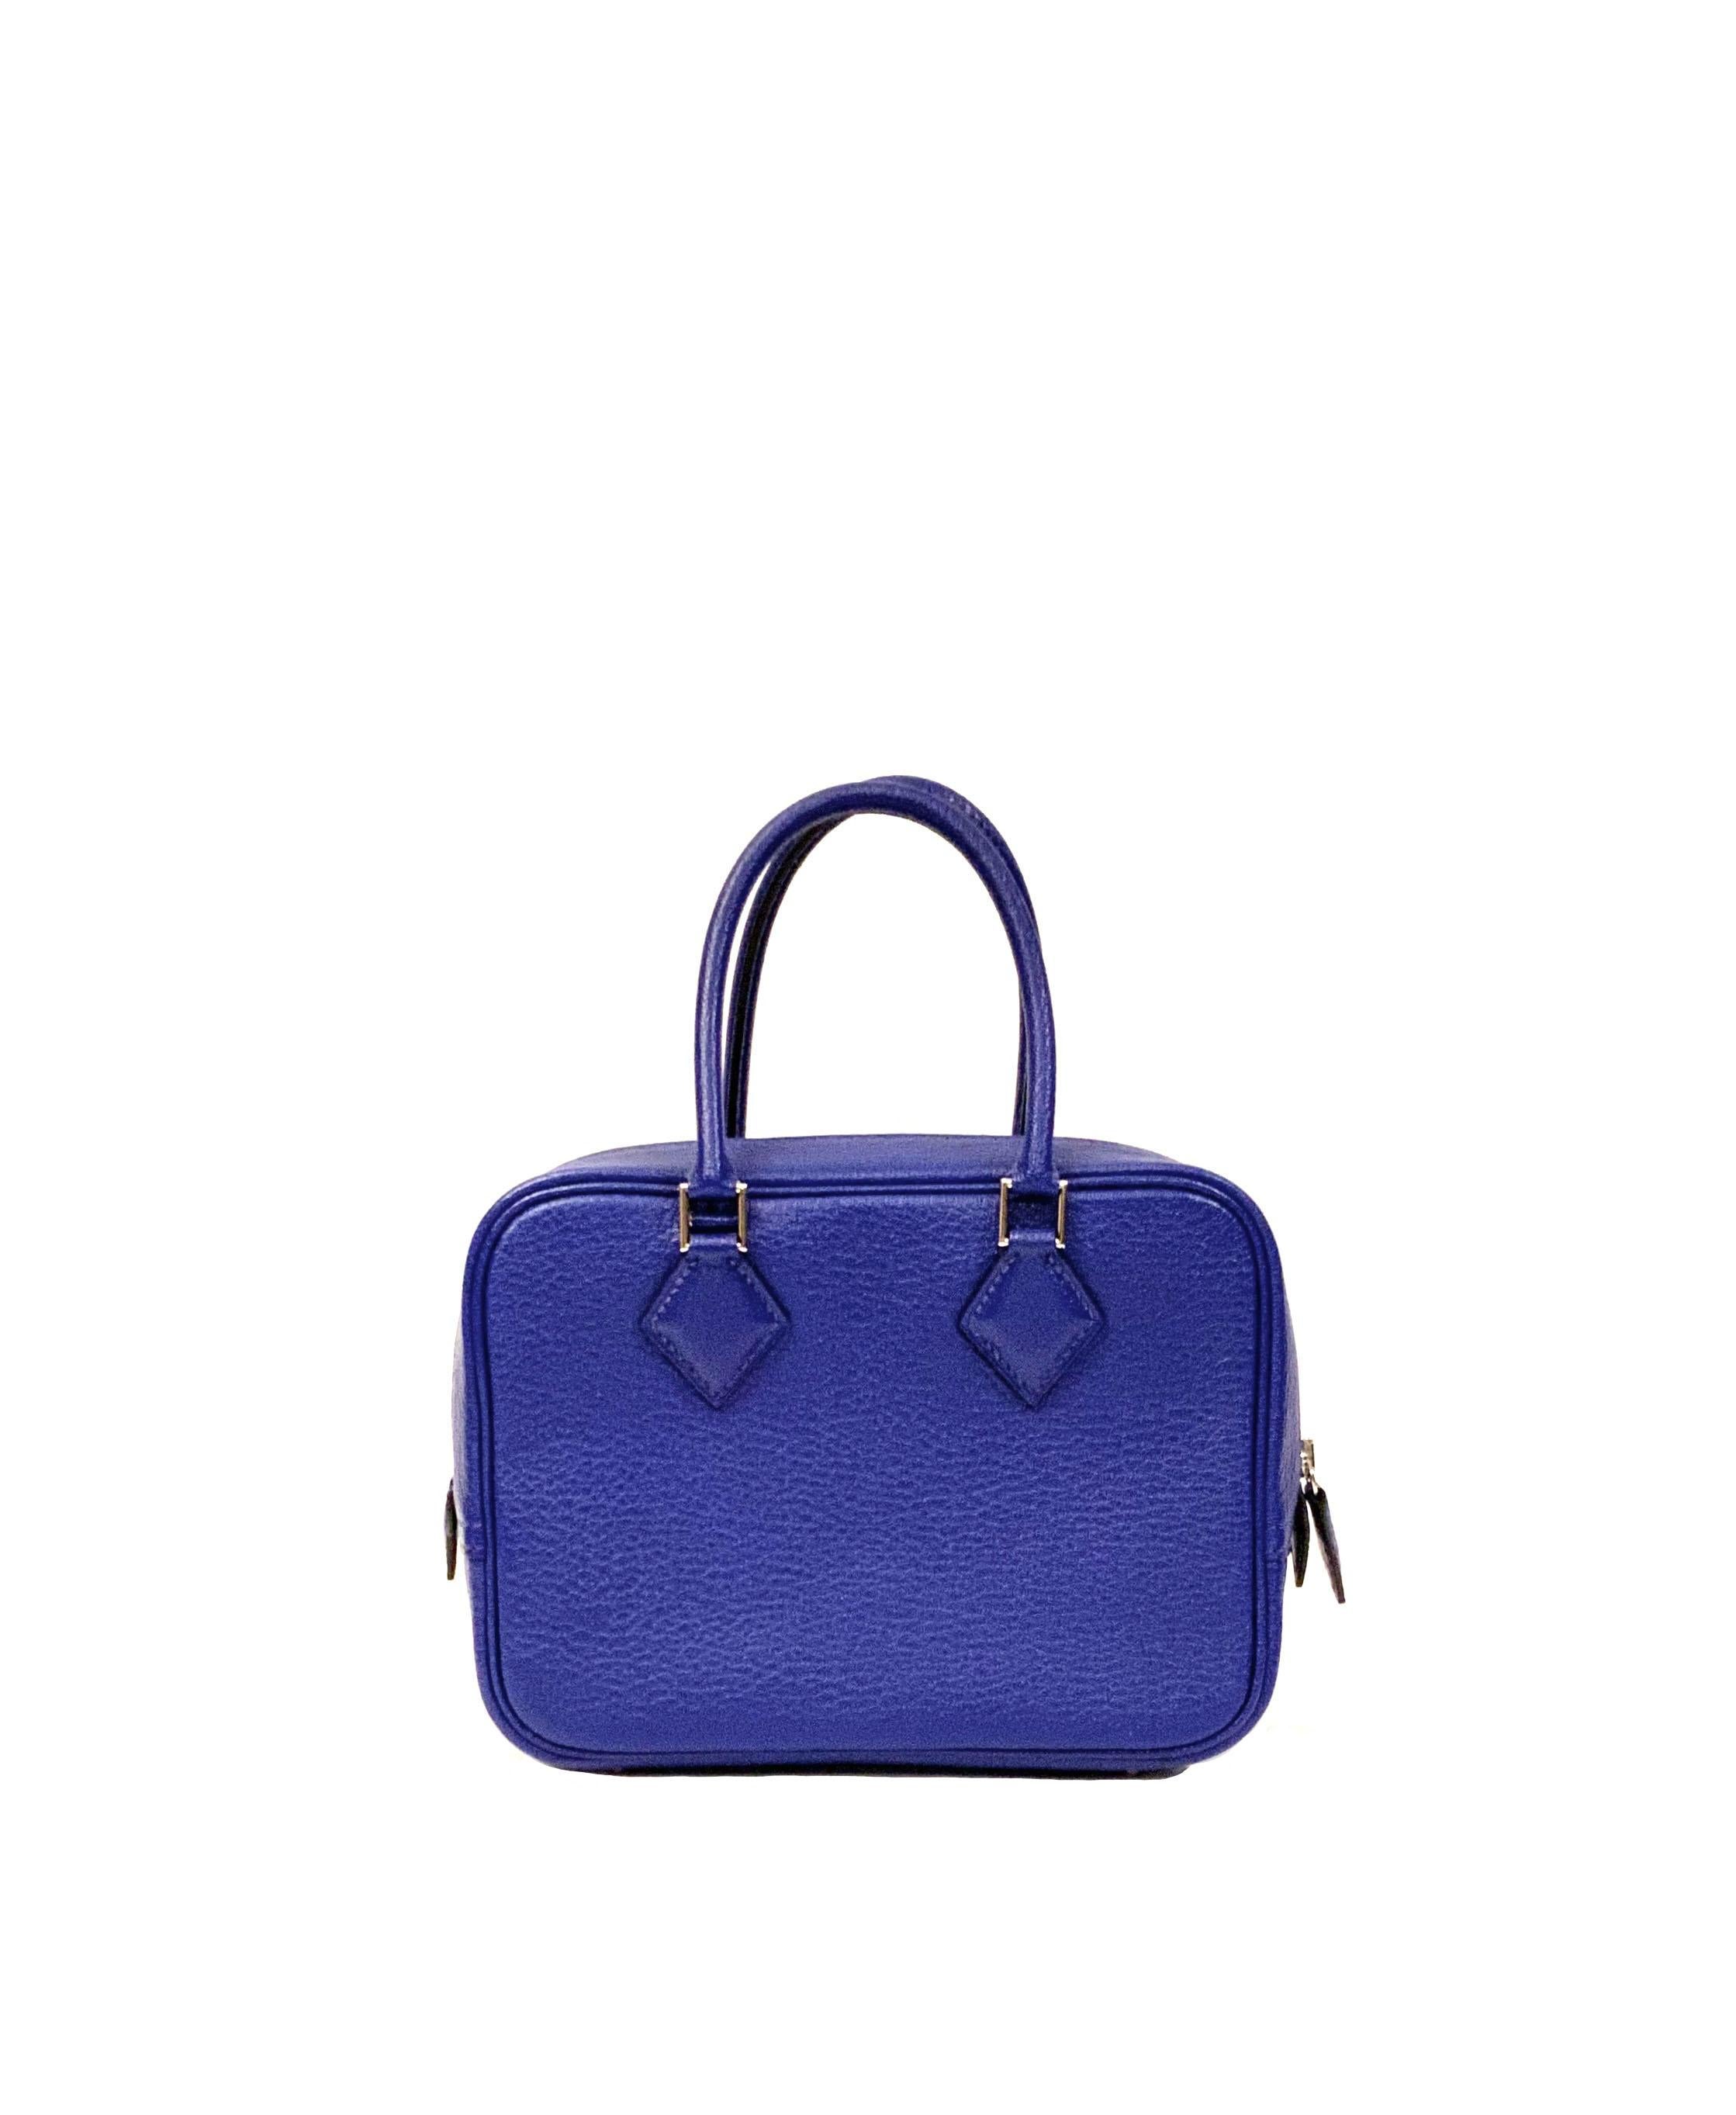 This pre-owned Hermès Plume II mini bag is made of Mysore goatskin leather in a bleu electrique color with palladium plated hardware.
It features a zip closure at the top, two rolled top handles, four bottom feet  and a matching removable bag strap